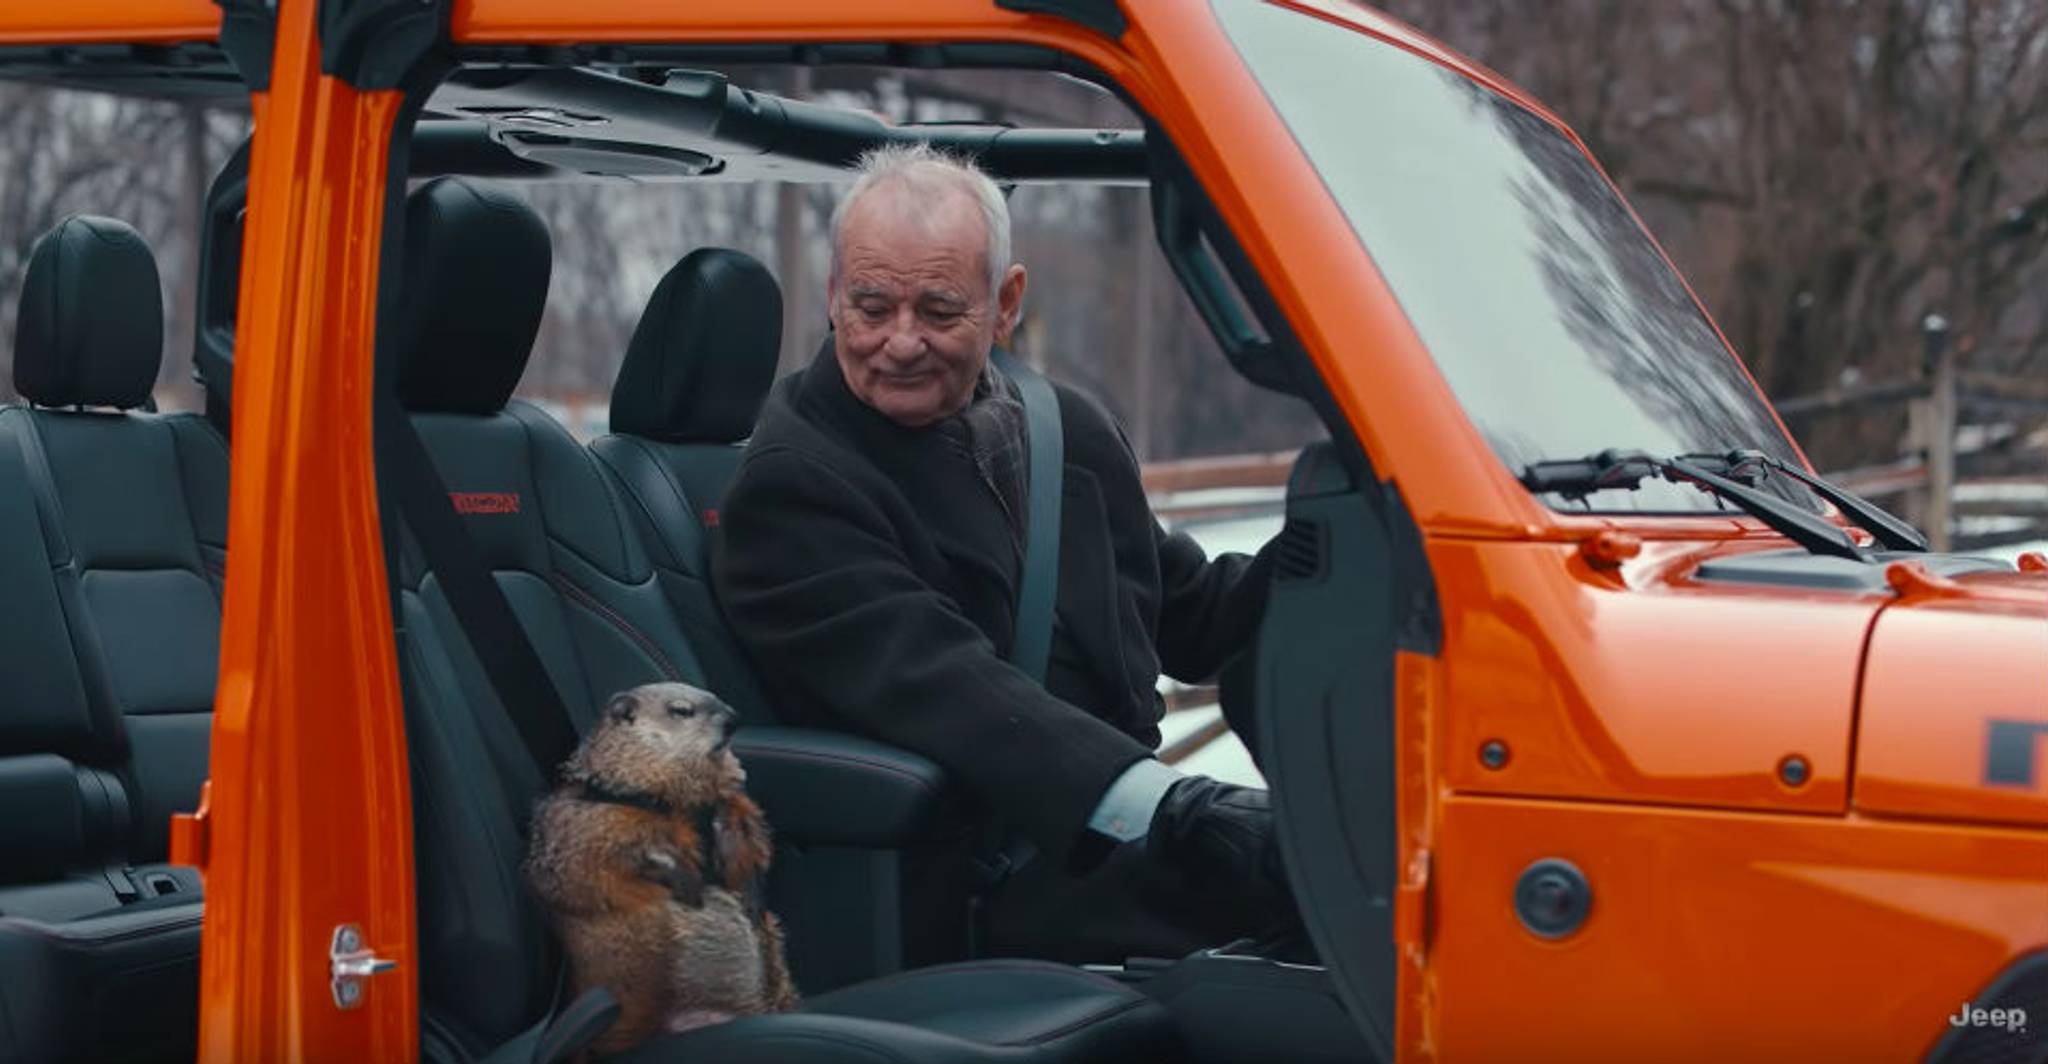 Jeep ad plays on Americans' 'Groundhog Day' nostalgia